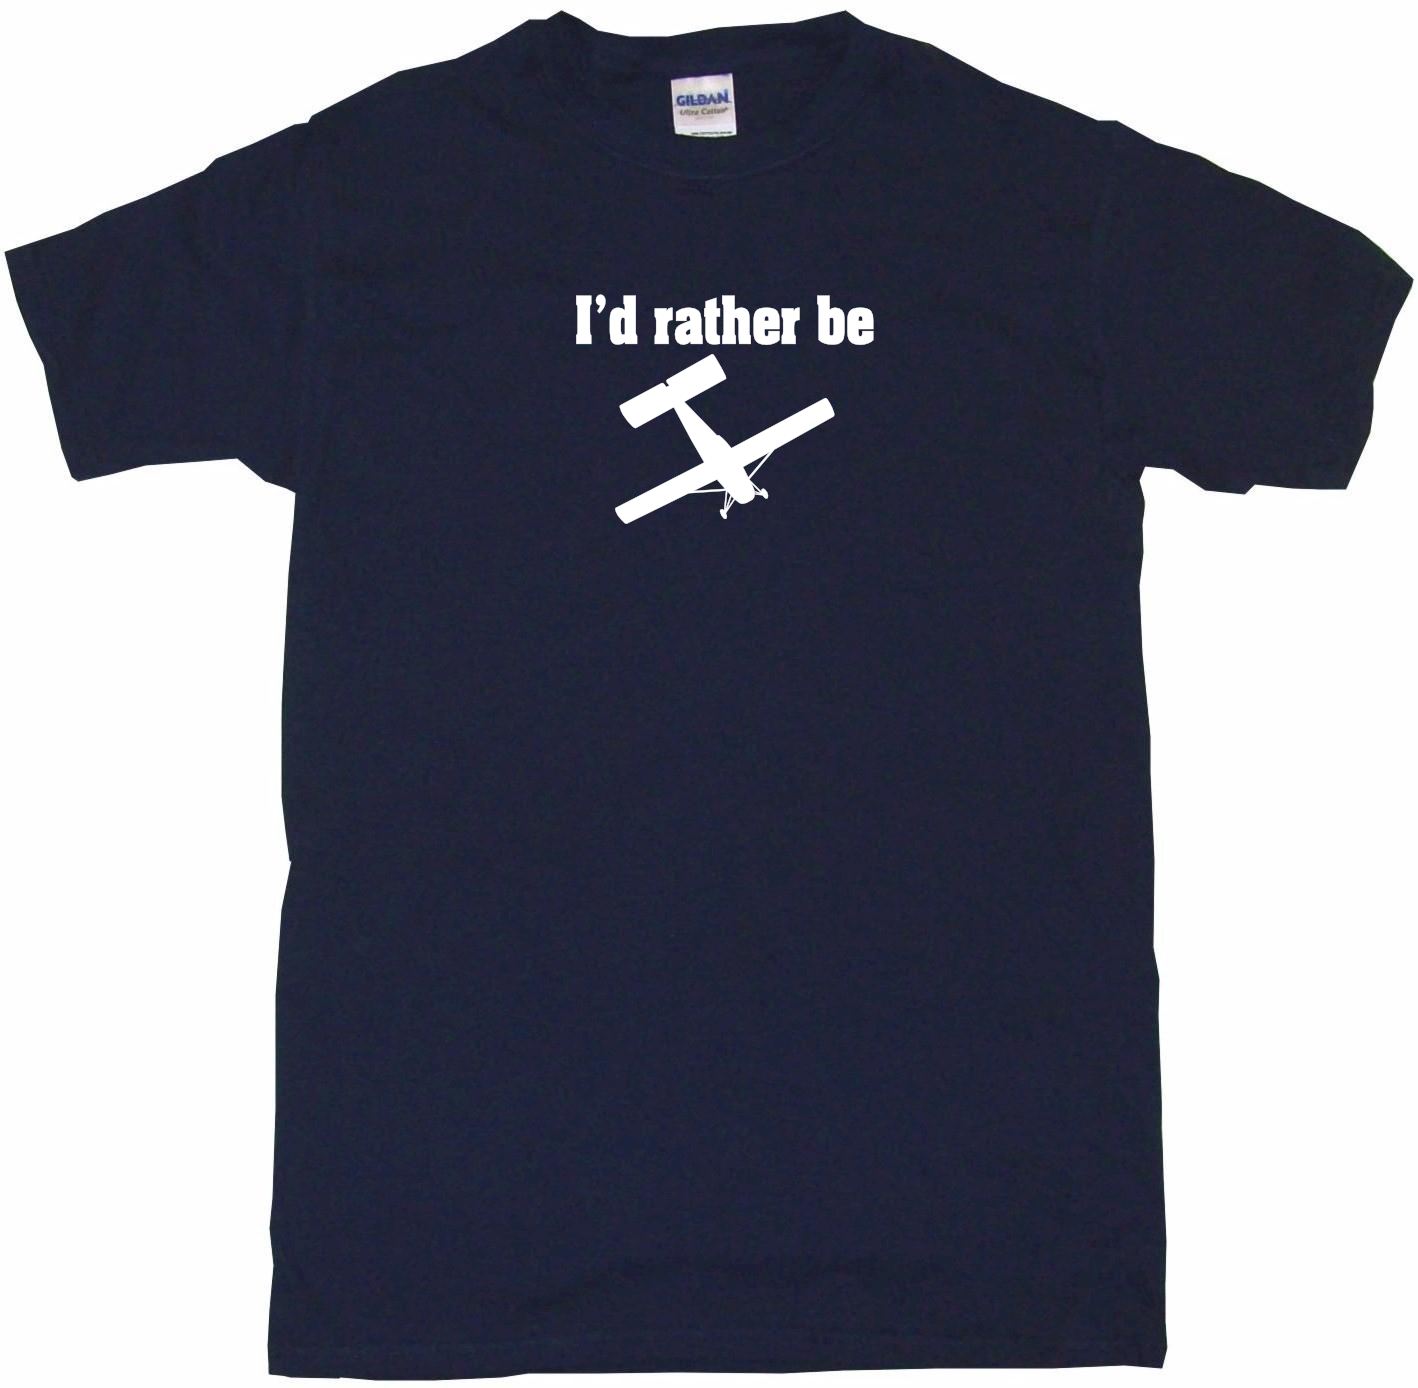 I'd Rather Be Single Engine Airplane Kids Tee Shirt Pick Size Color 2T-XL 